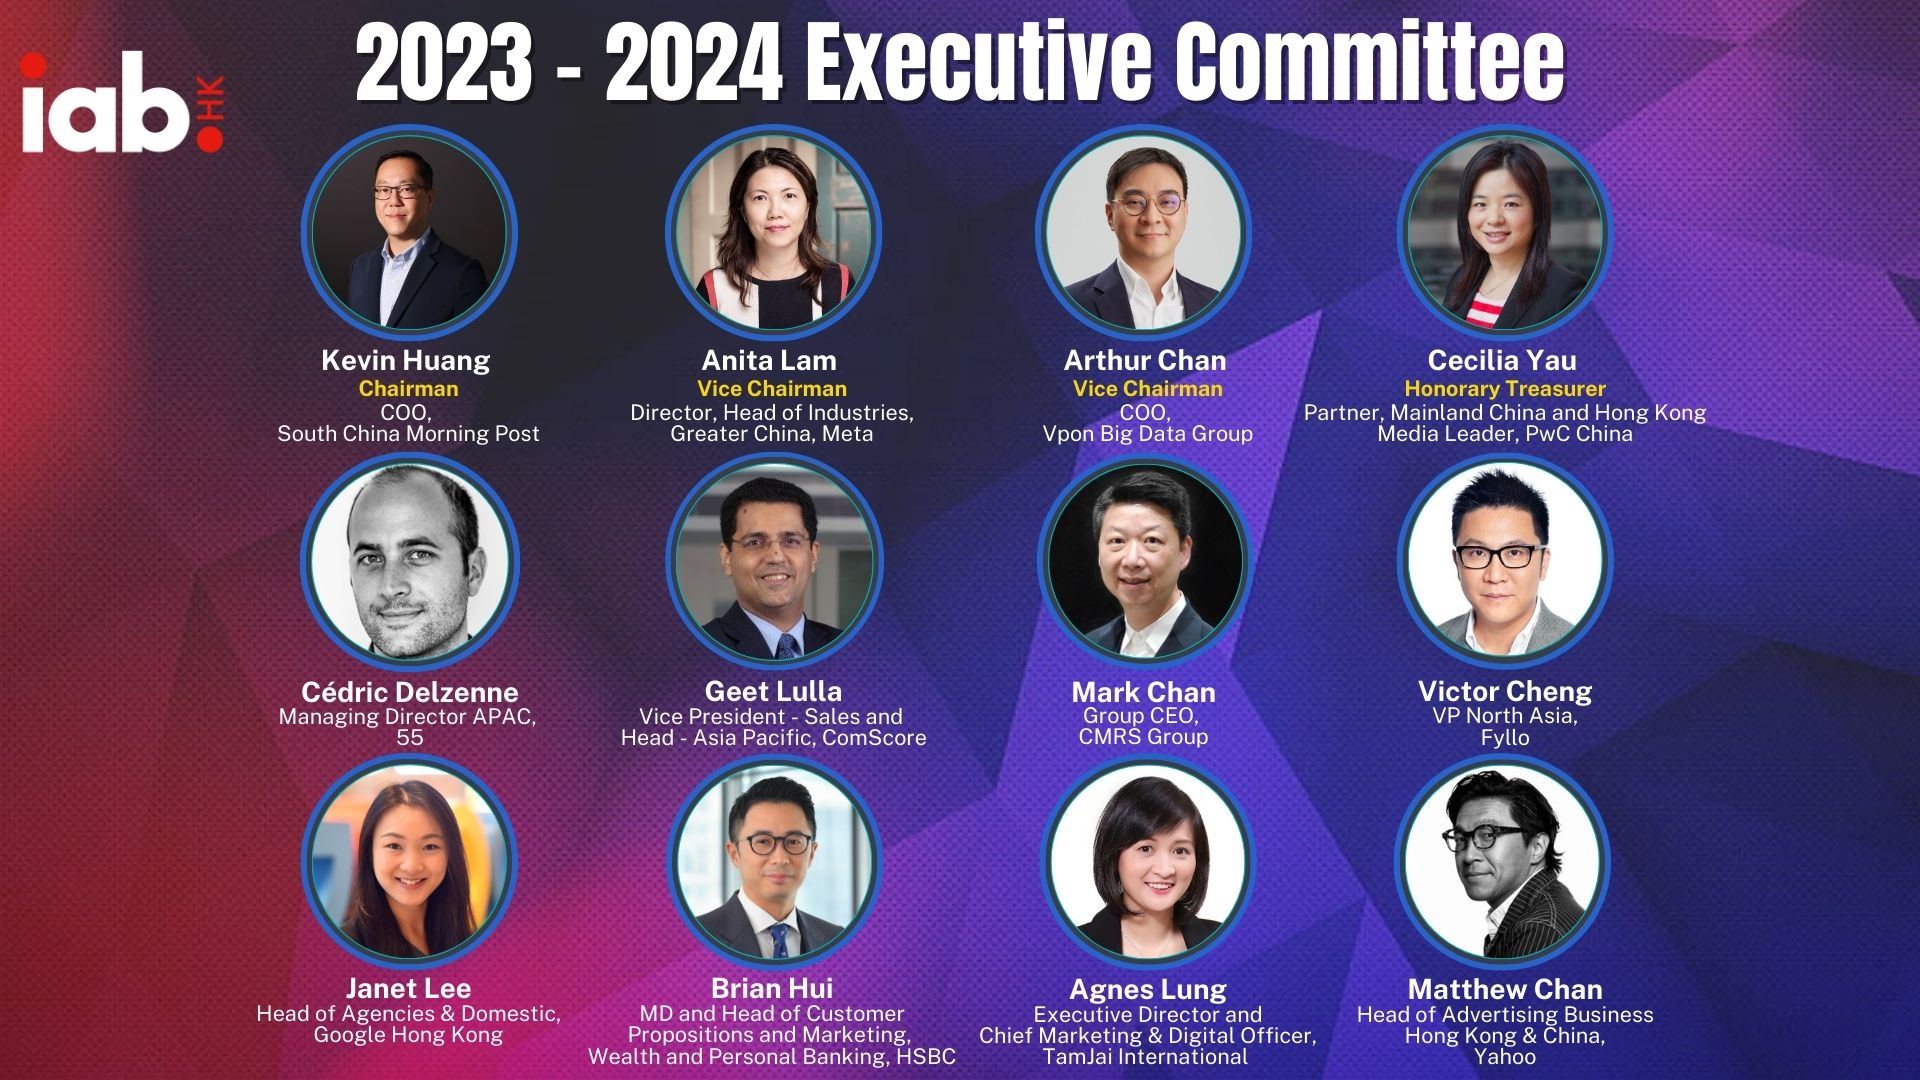 2023 - 2024 Executive Committee